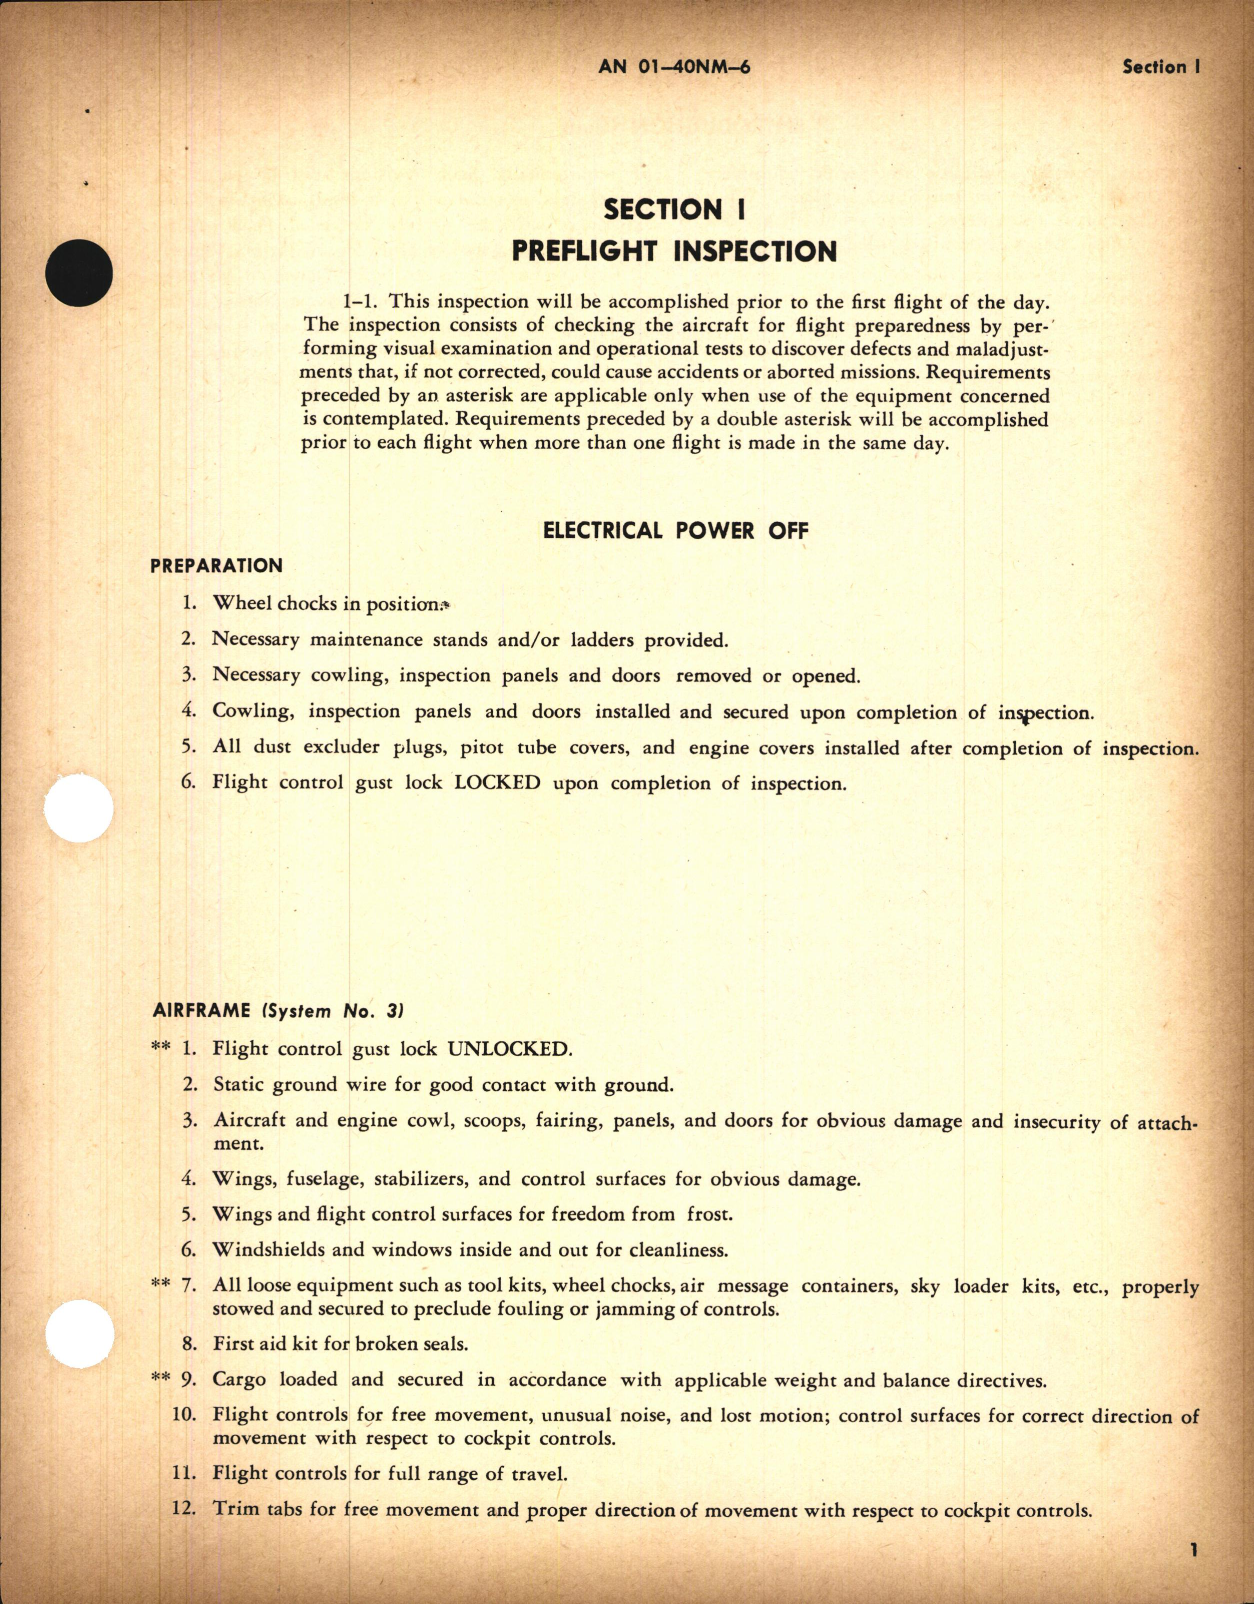 Sample page 5 from AirCorps Library document: Inspection Requirements for C-54 and R-5D Aircraft